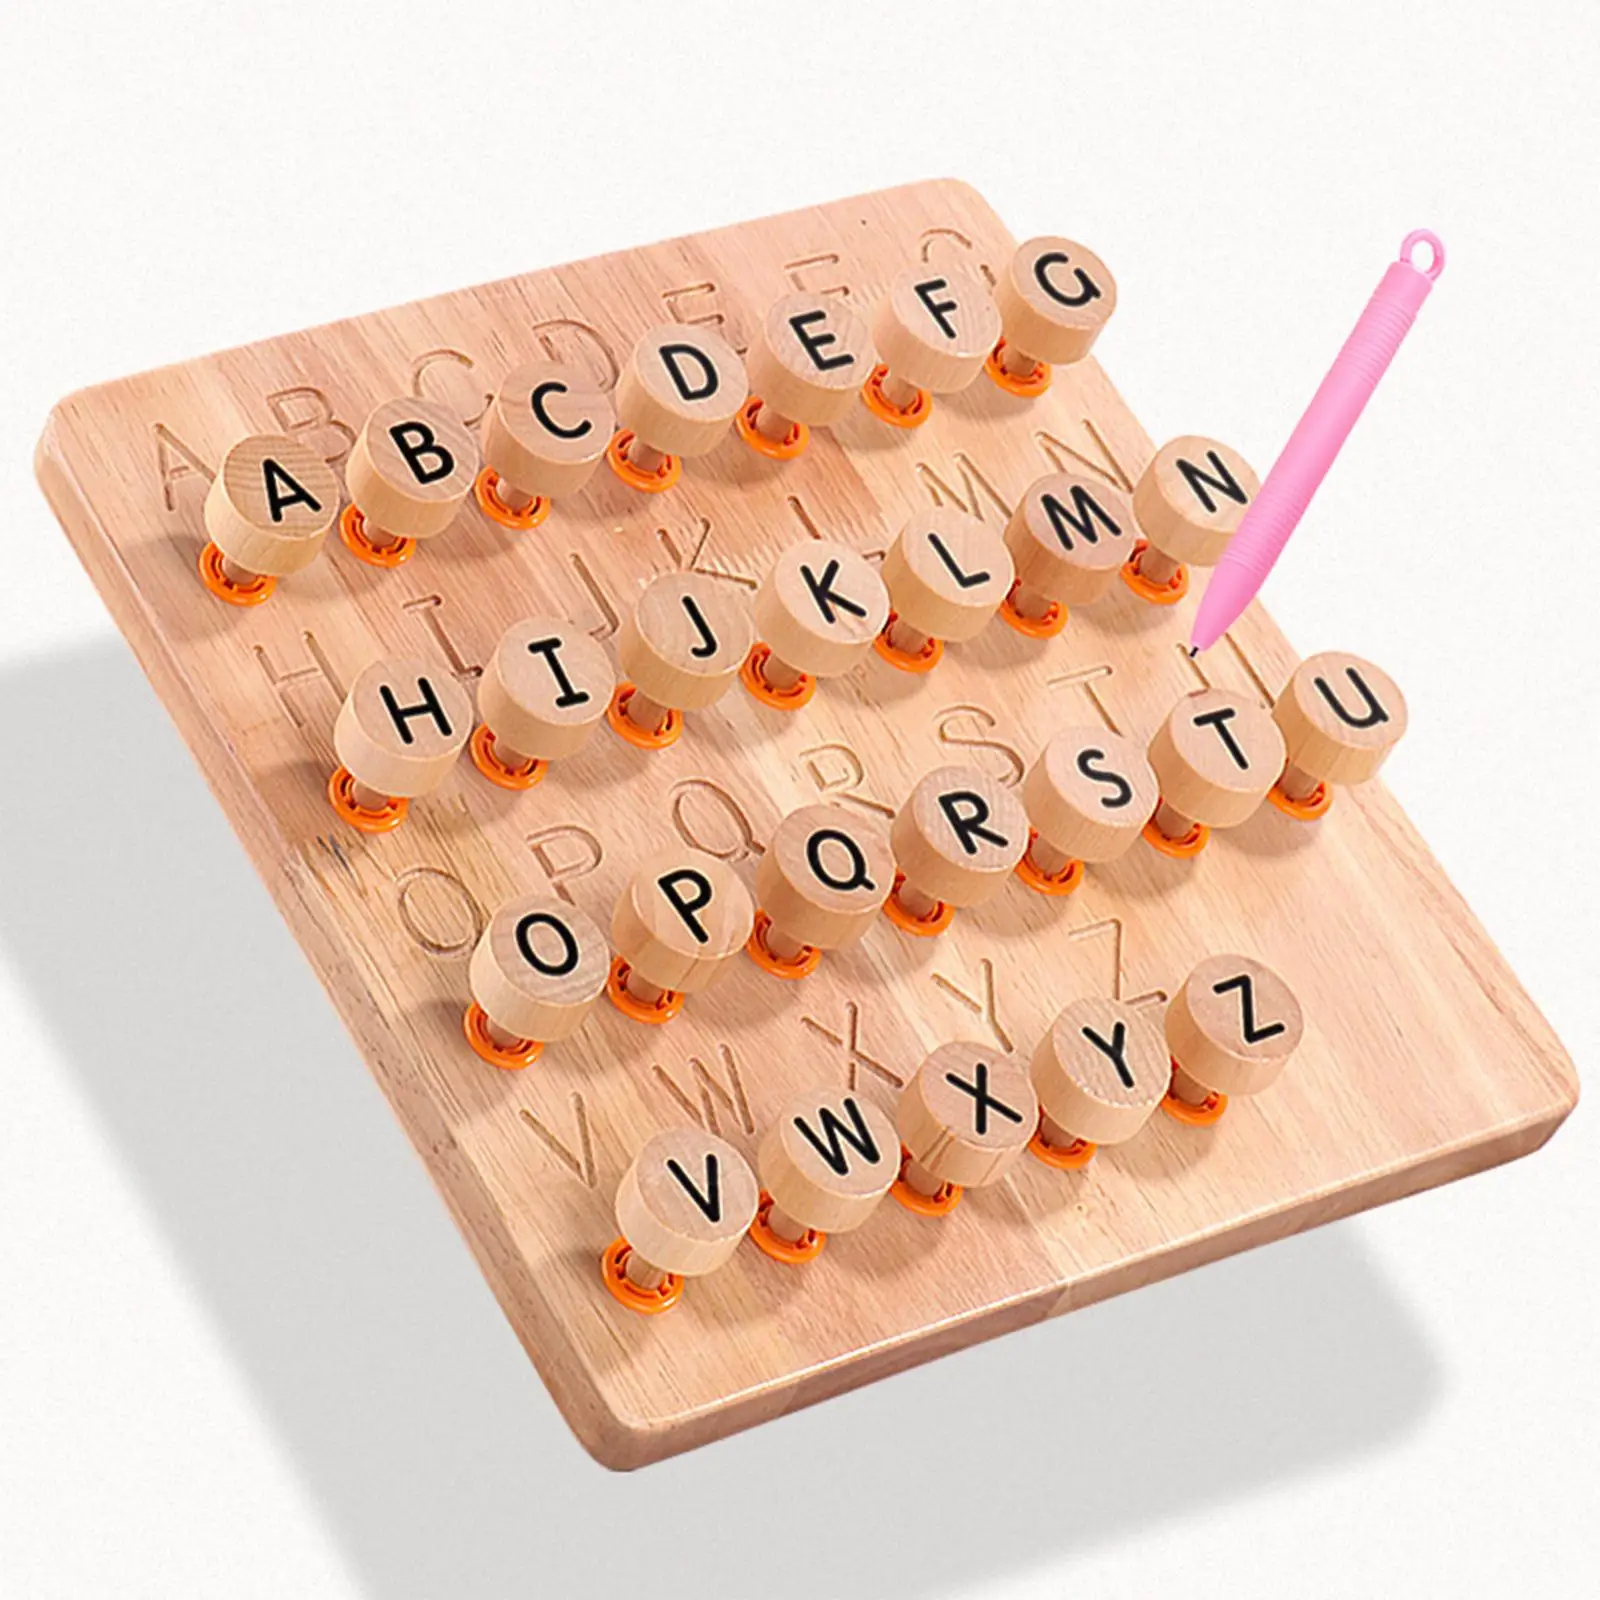 Wooden Alphabet Tracing Board Educational Writing Aids Board Game Letters Puzzles for gift Children Girls 3+ Years Kids